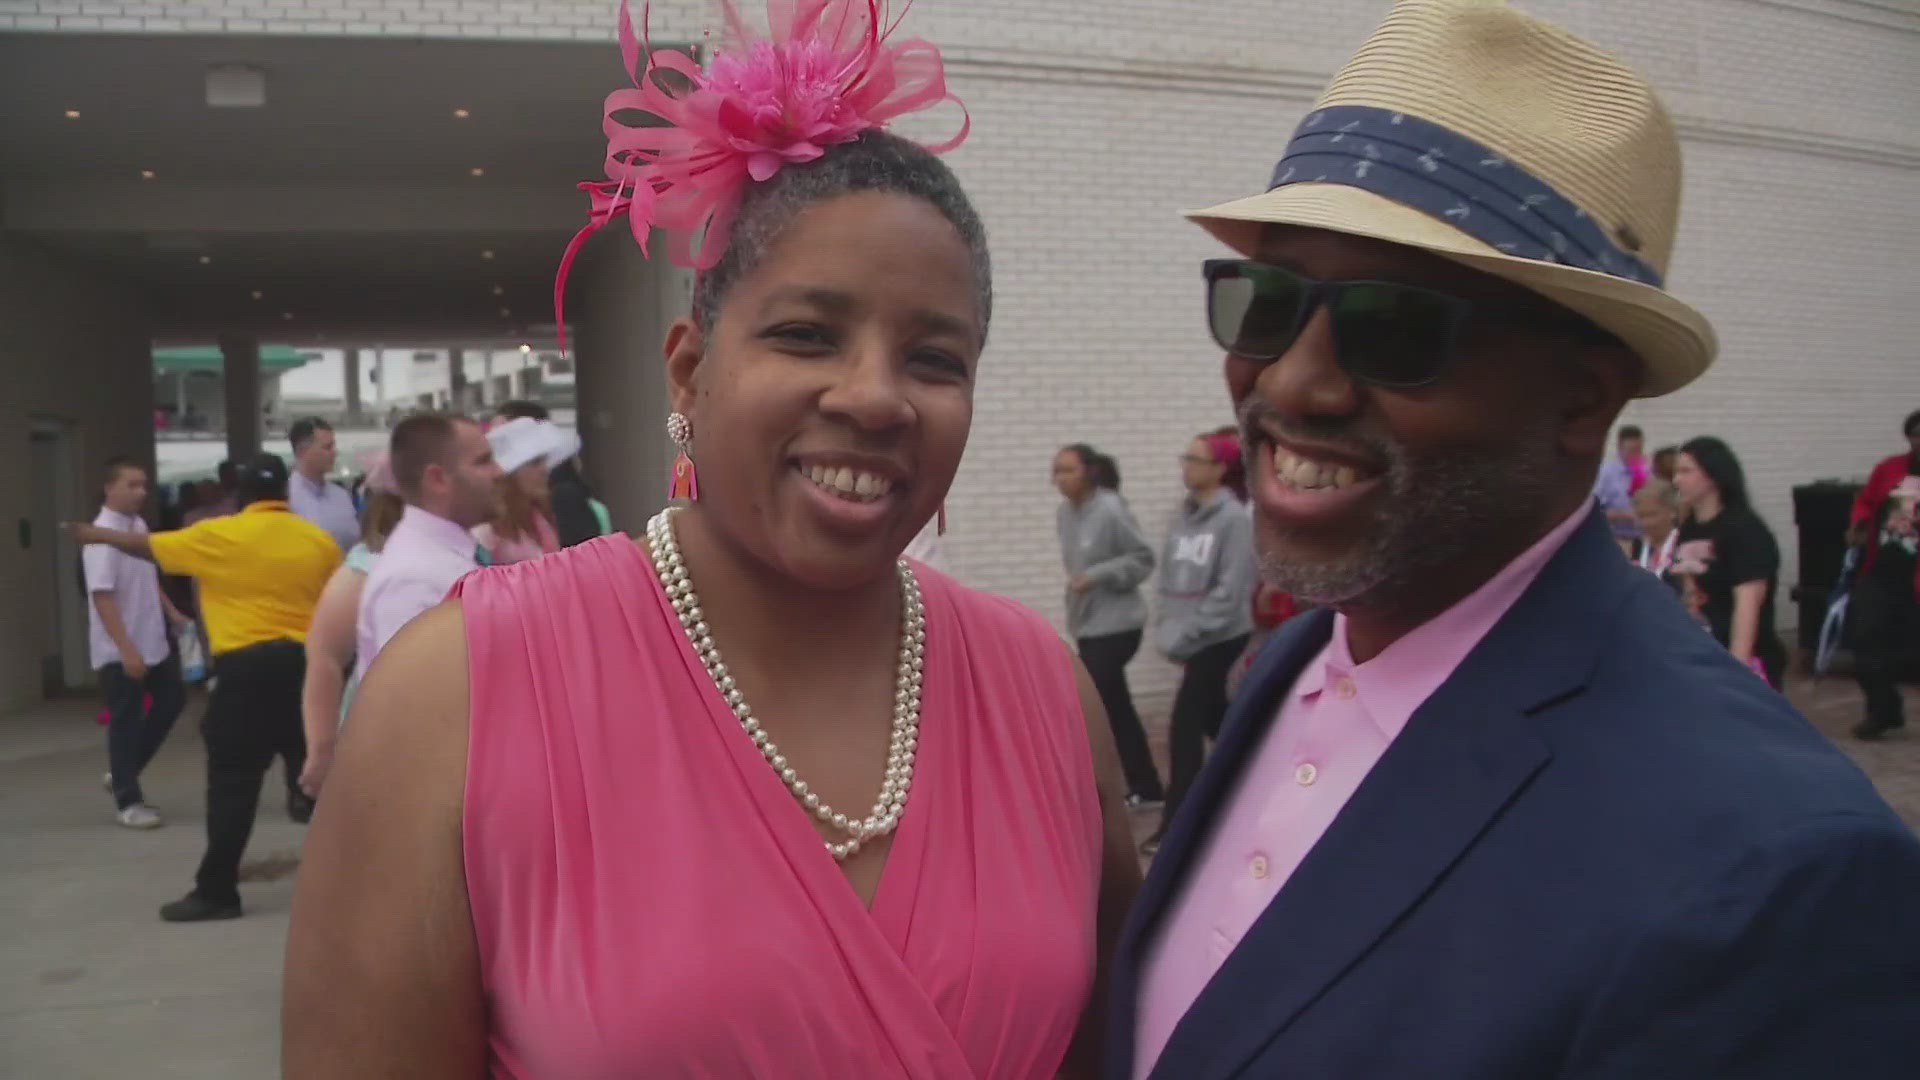 A Georgia couple flew up to Louisville for the historic running of the Kentucky Derby.